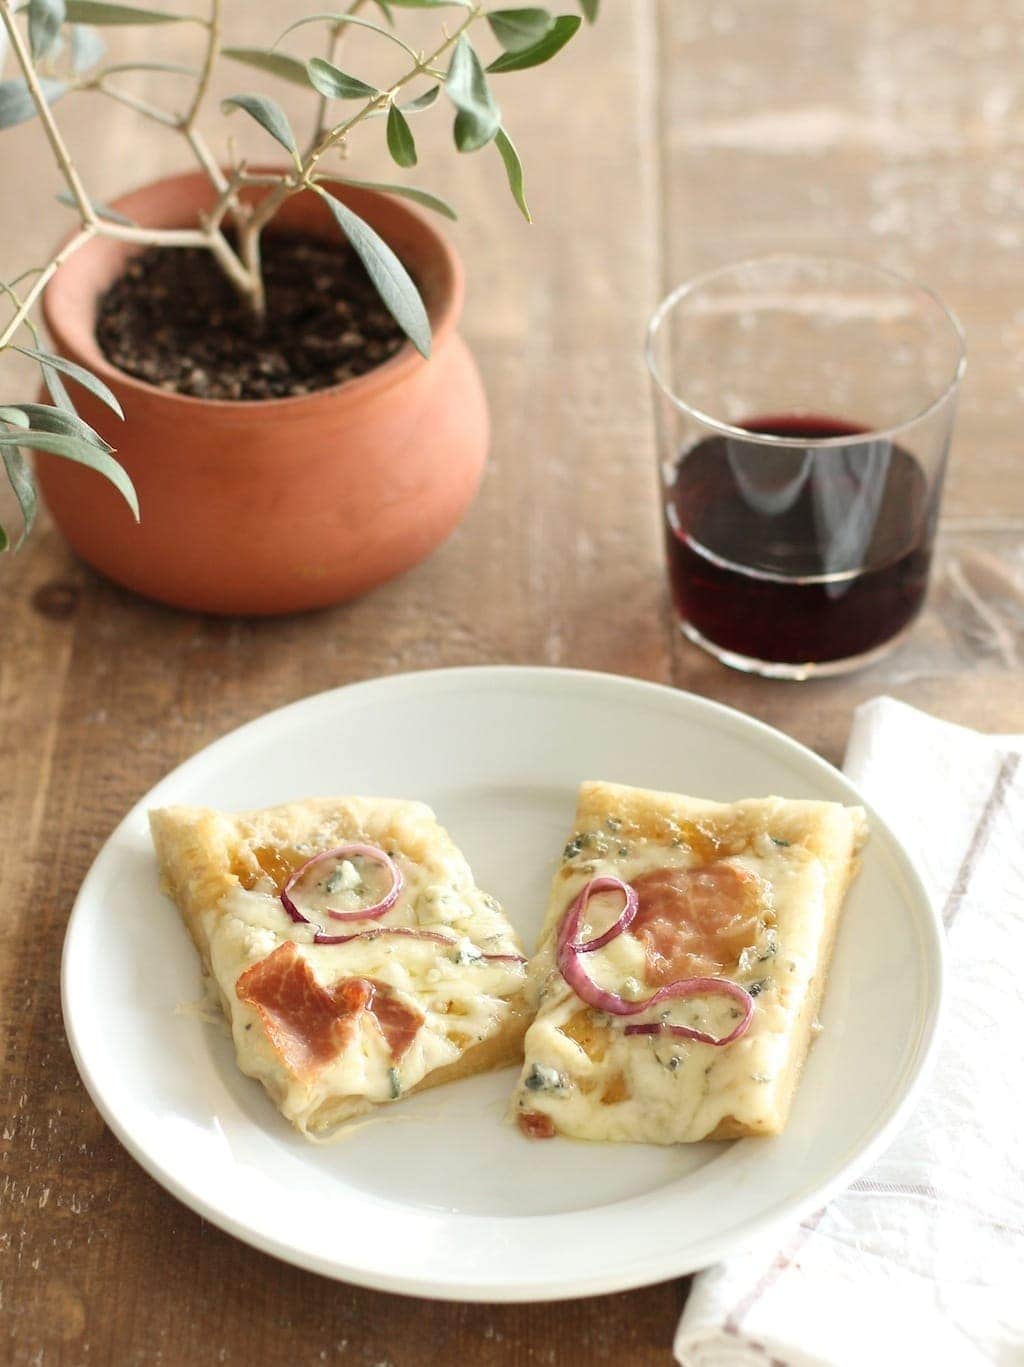 prosciutto pizza on white plate with wine and olive plant